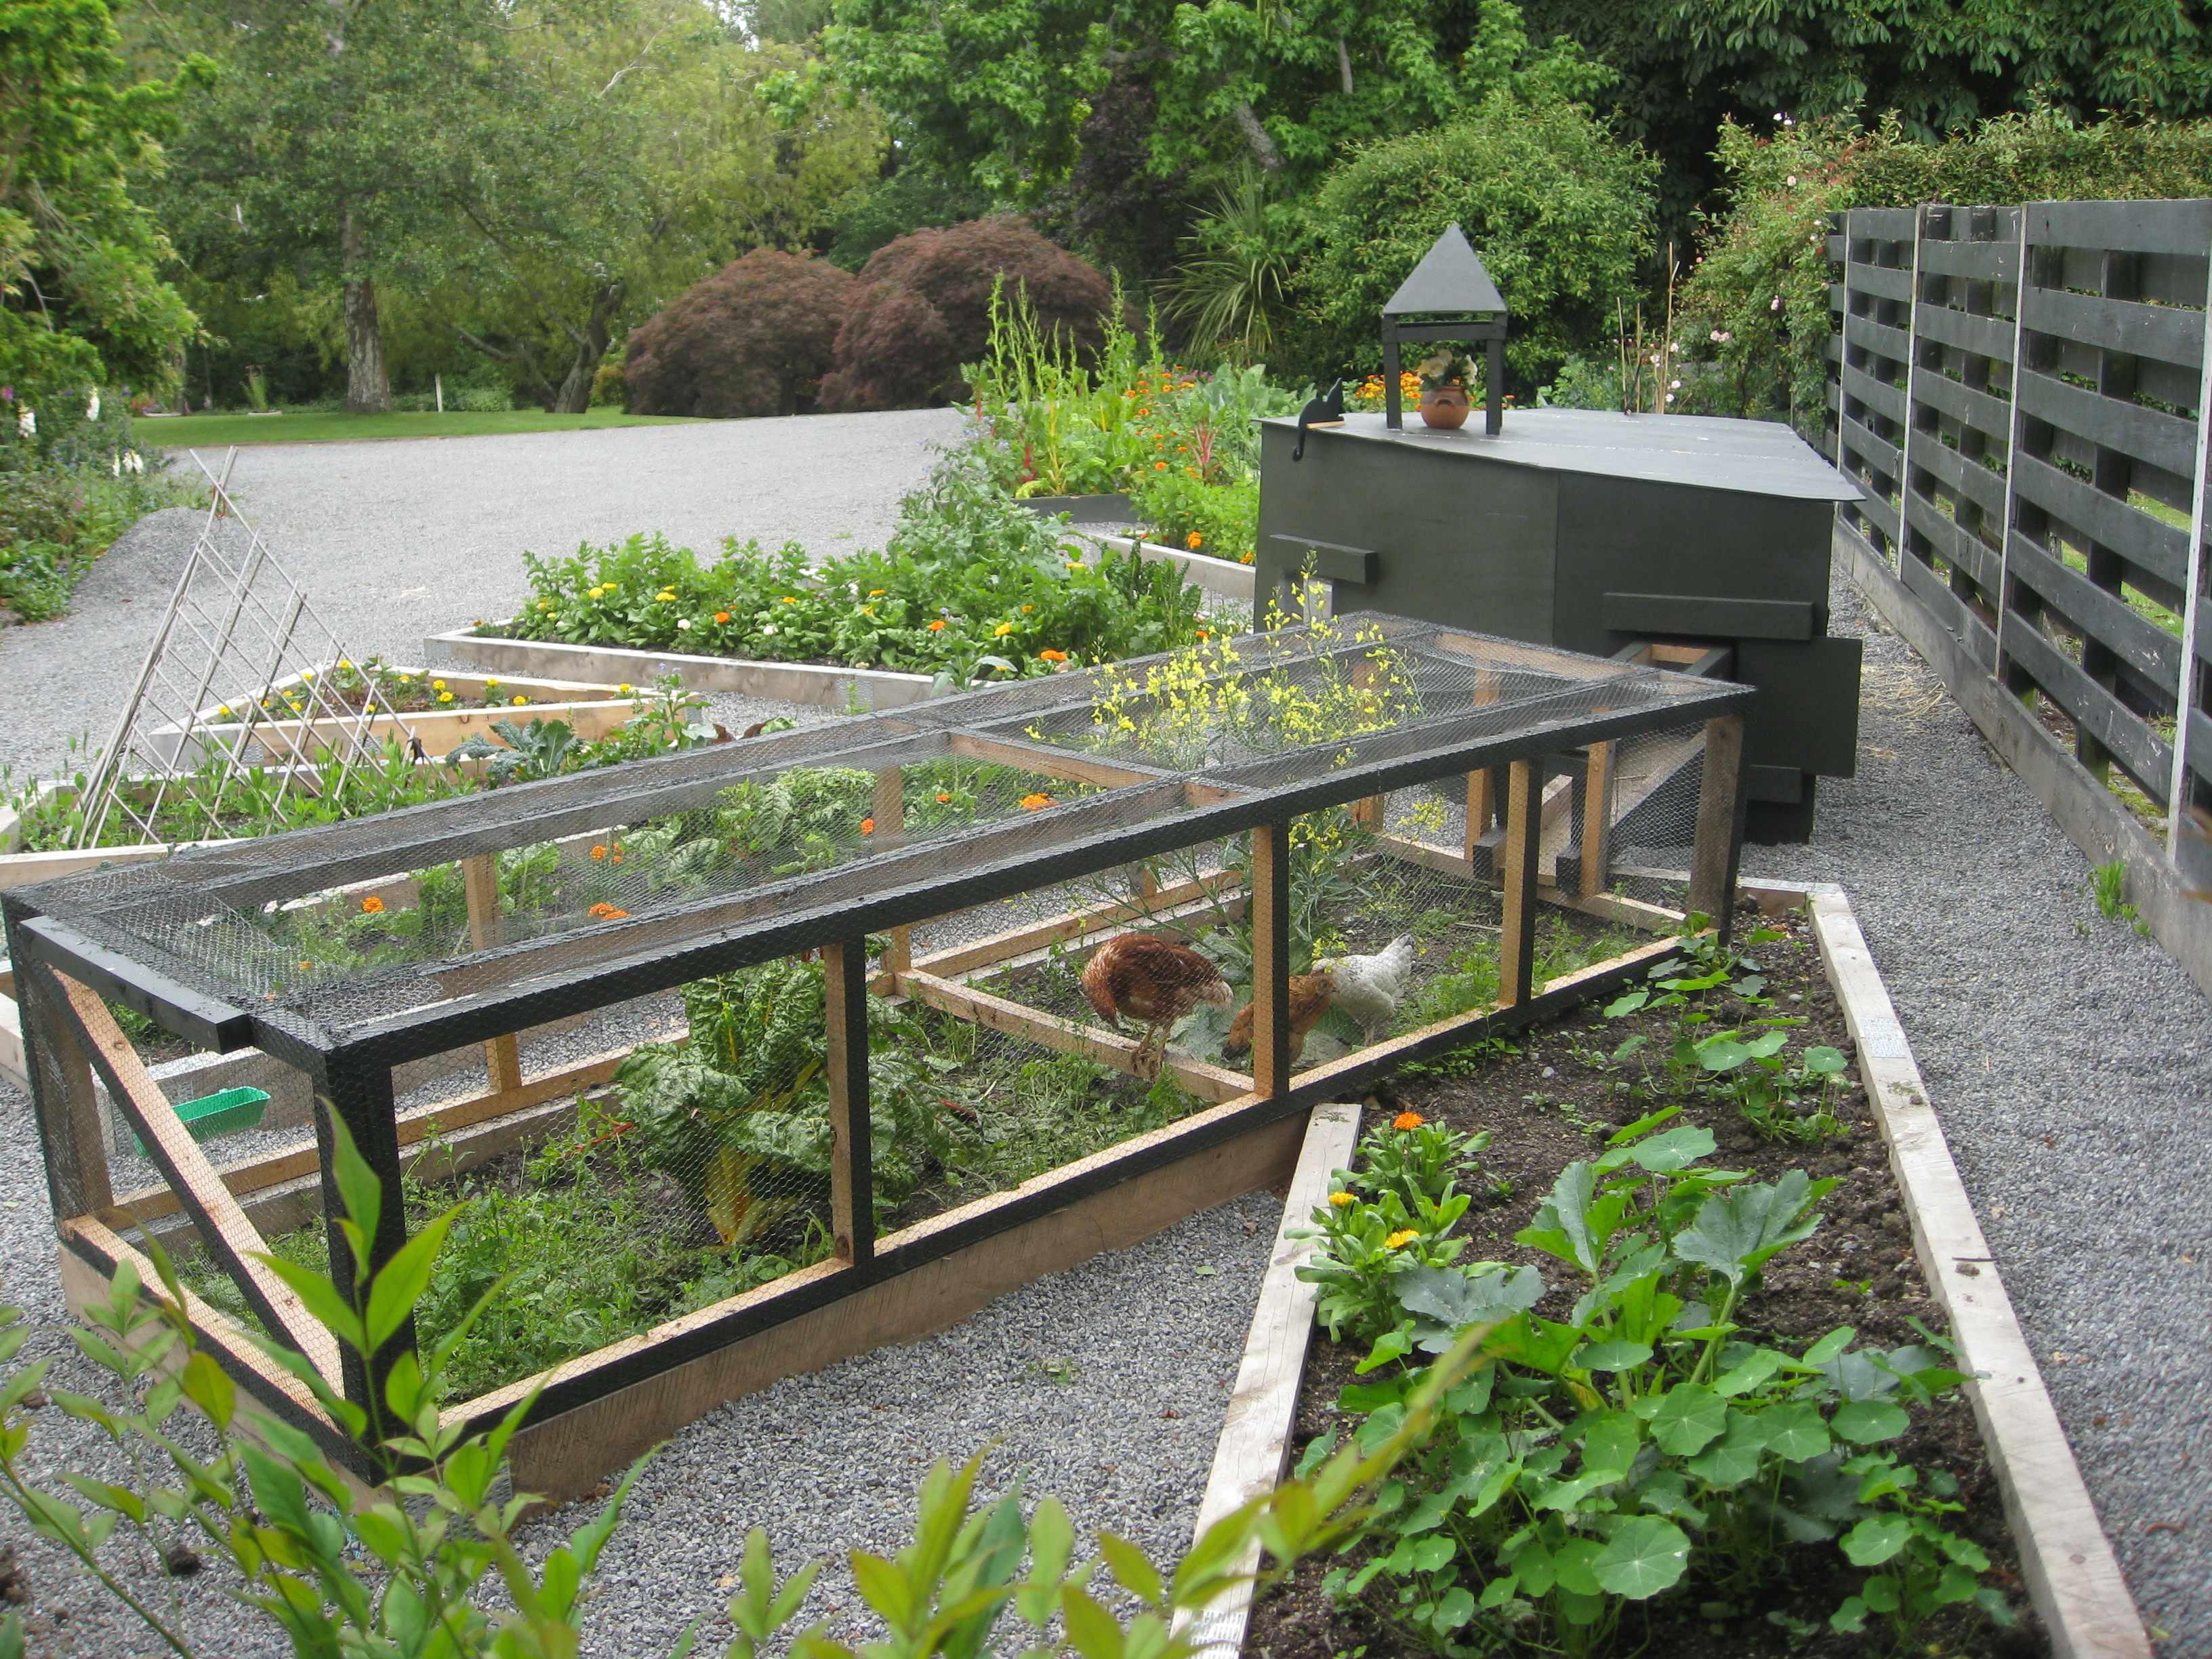 It was built on permaculture principles and is sustainable, organic 